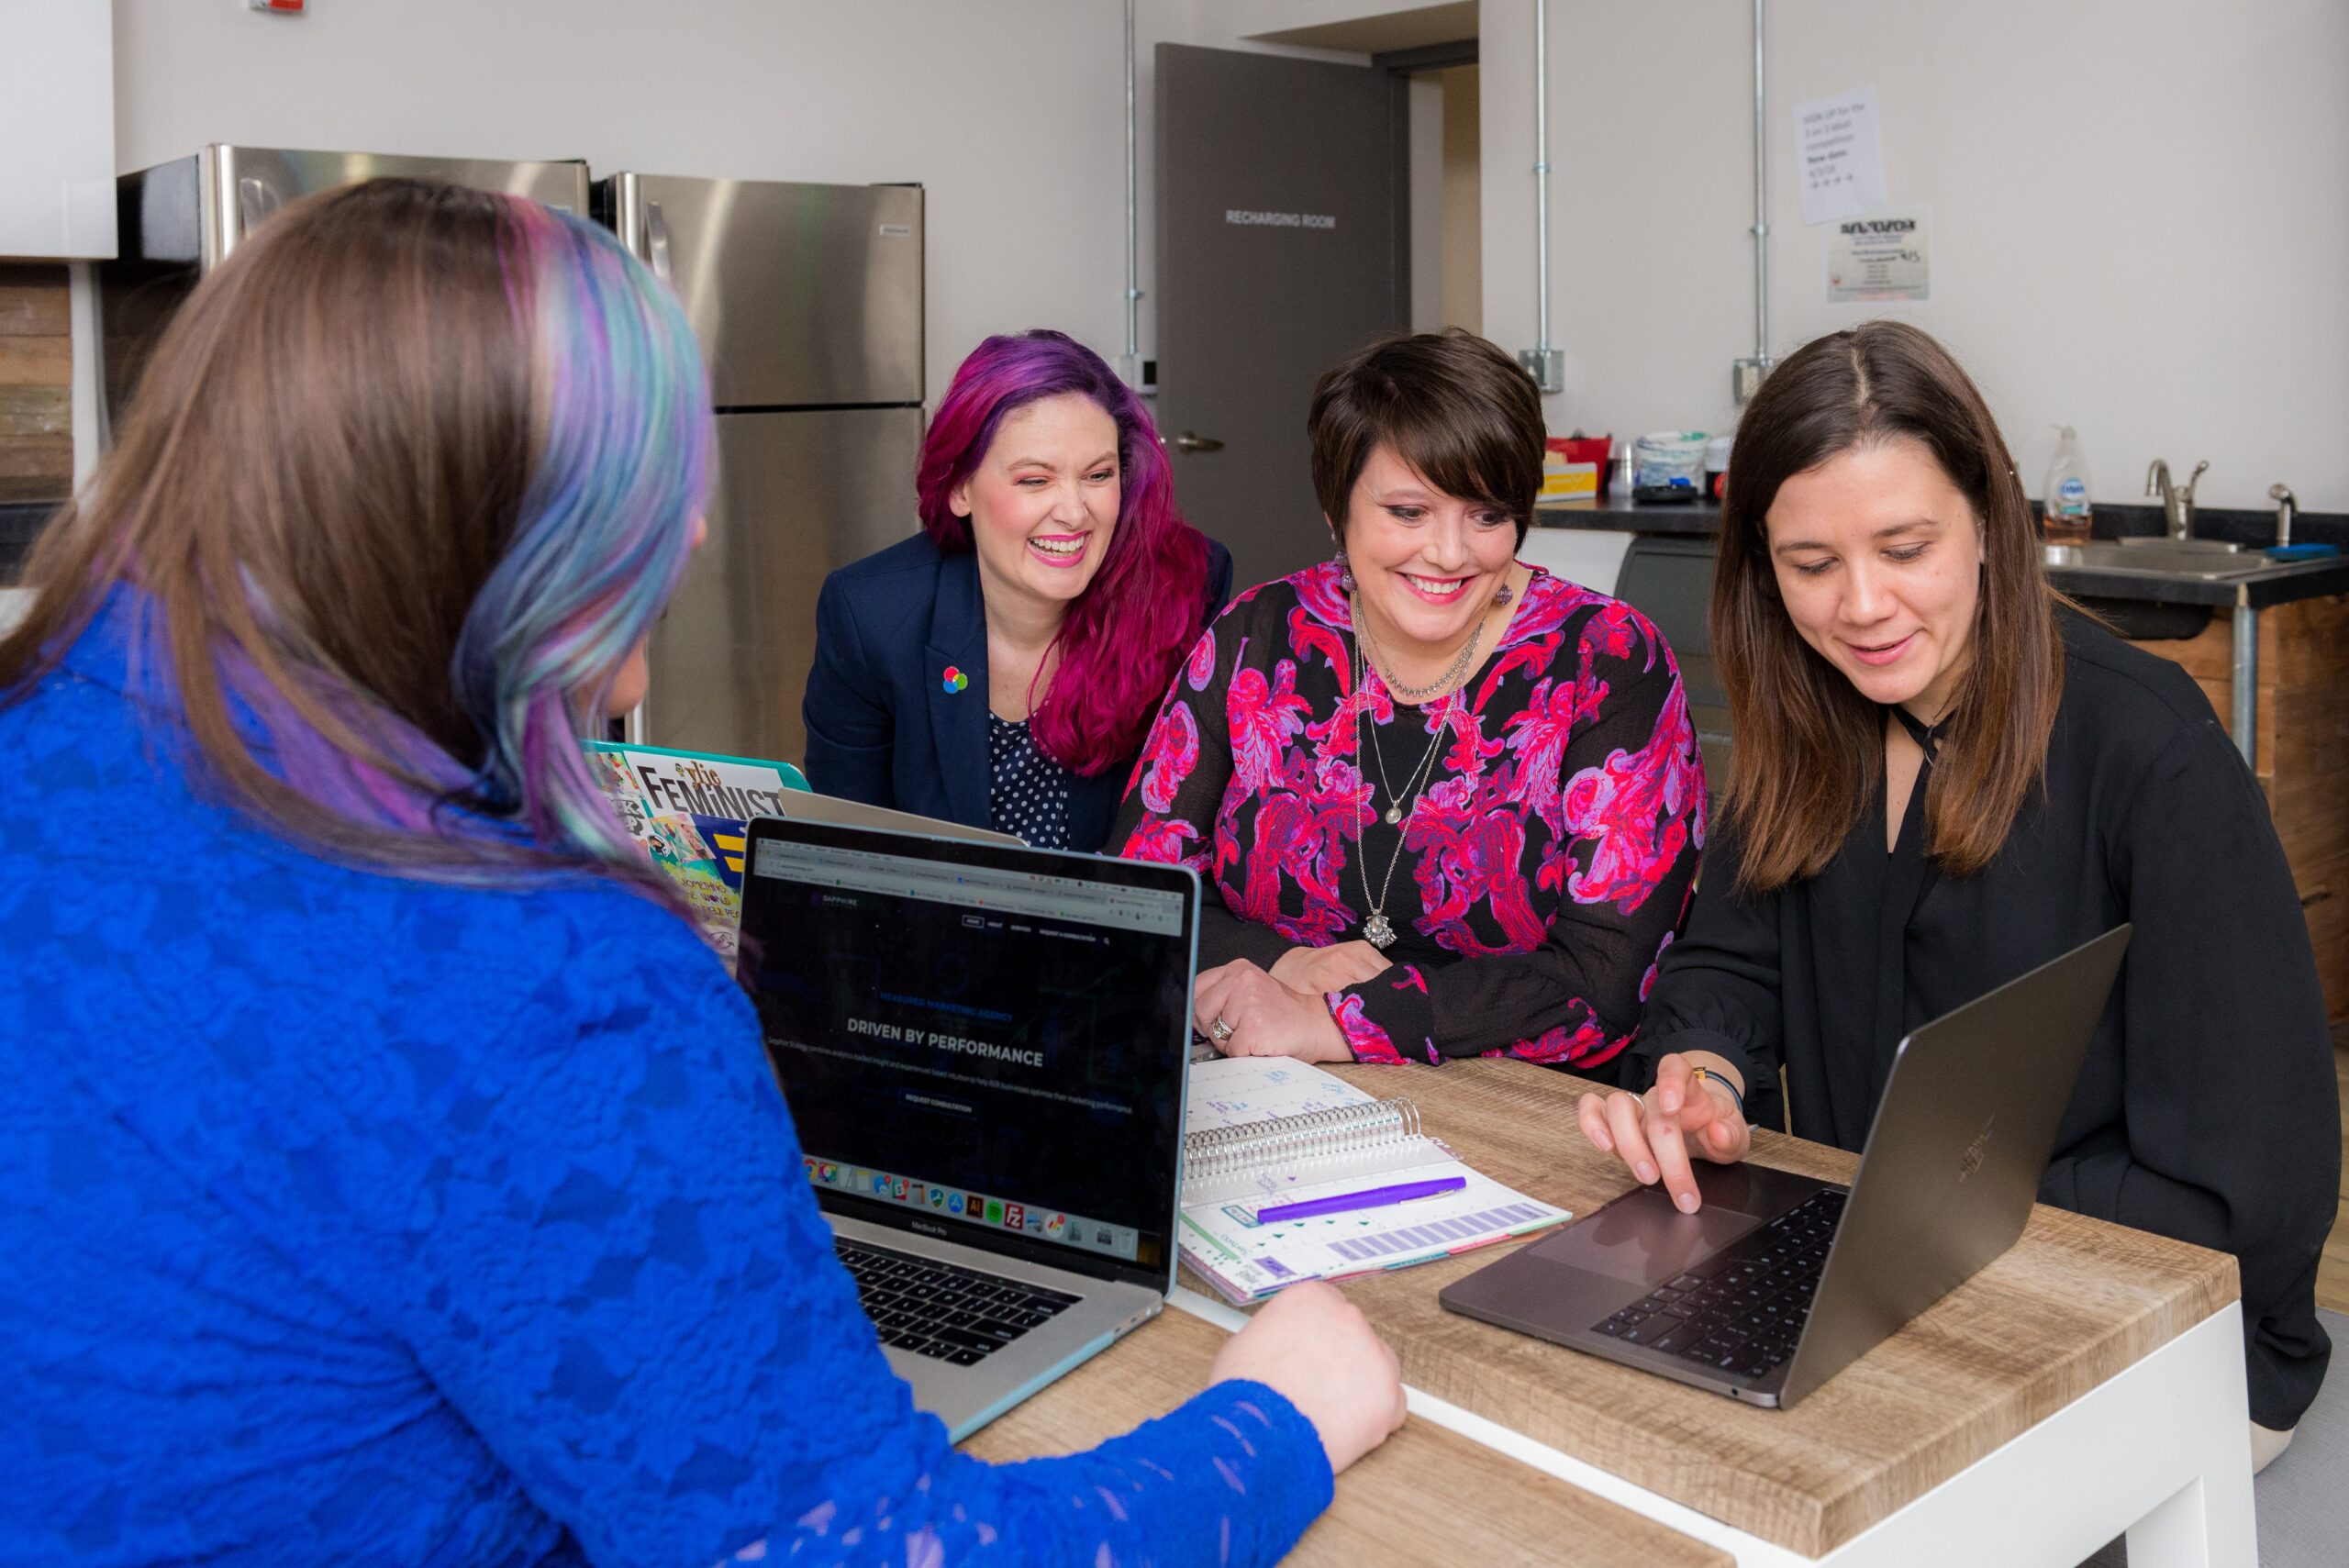 a group of women who are sitting at the same table are working on a project together with one woman leading them through content on a laptop screen